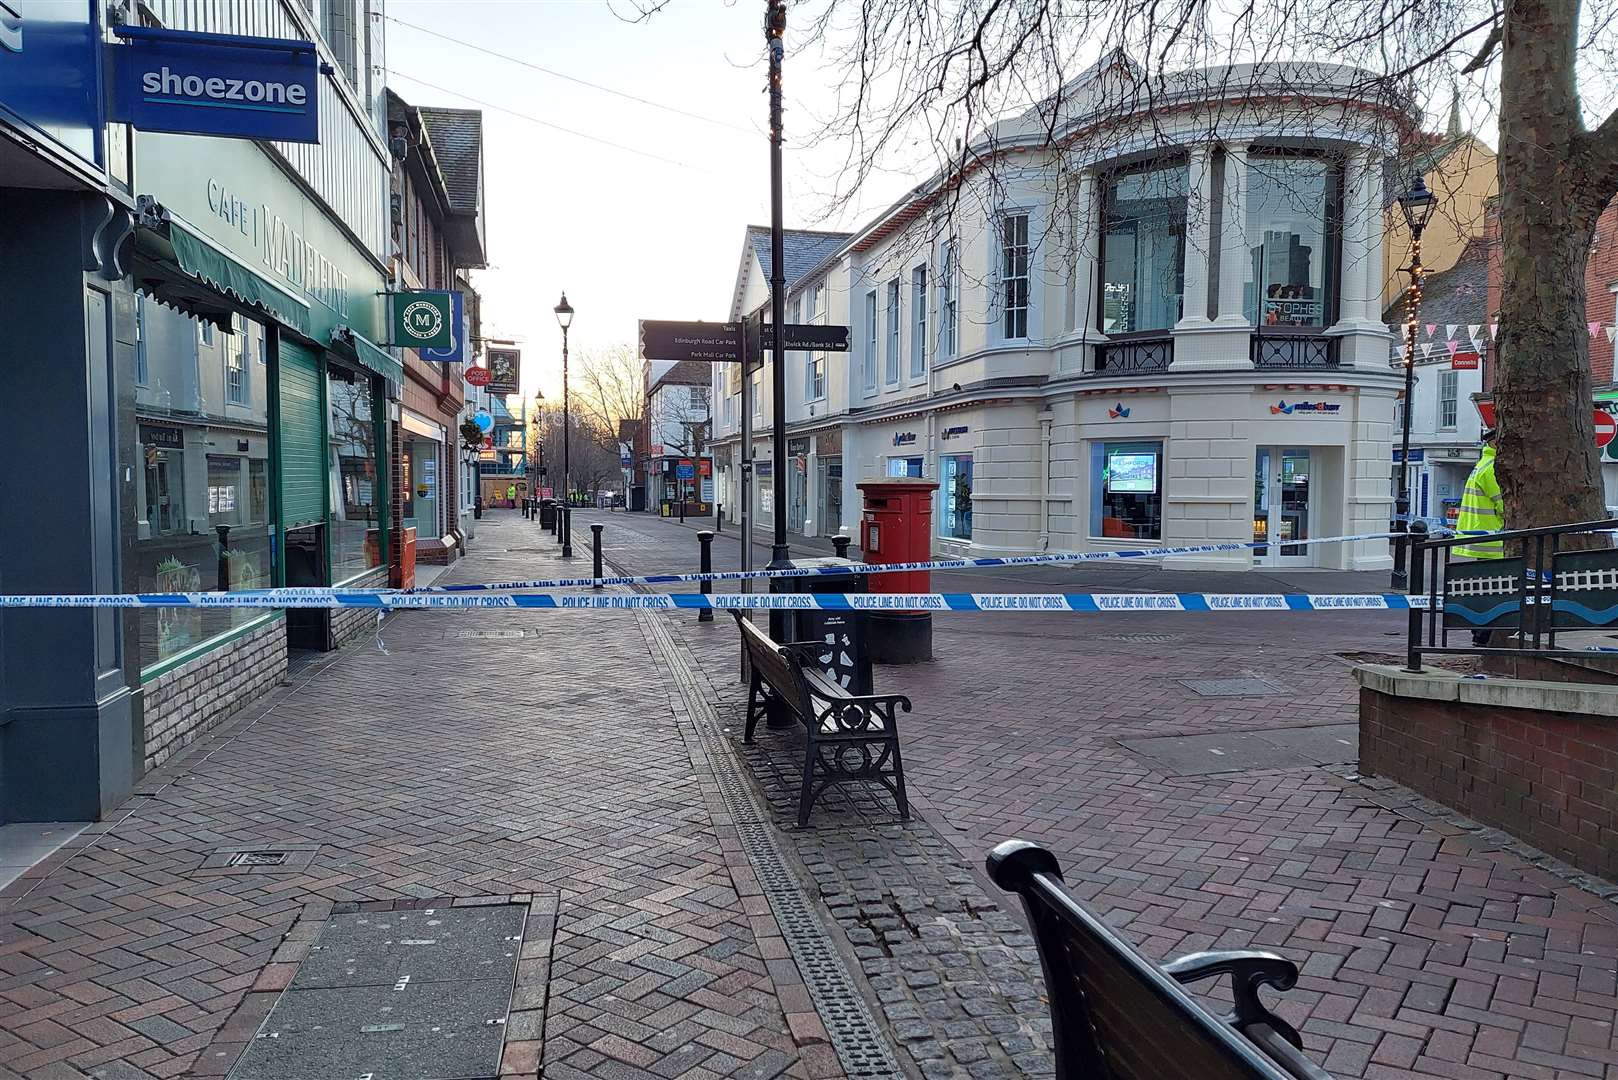 Ashford High Street was taped off by police. Picture: Dan Wright/KMG